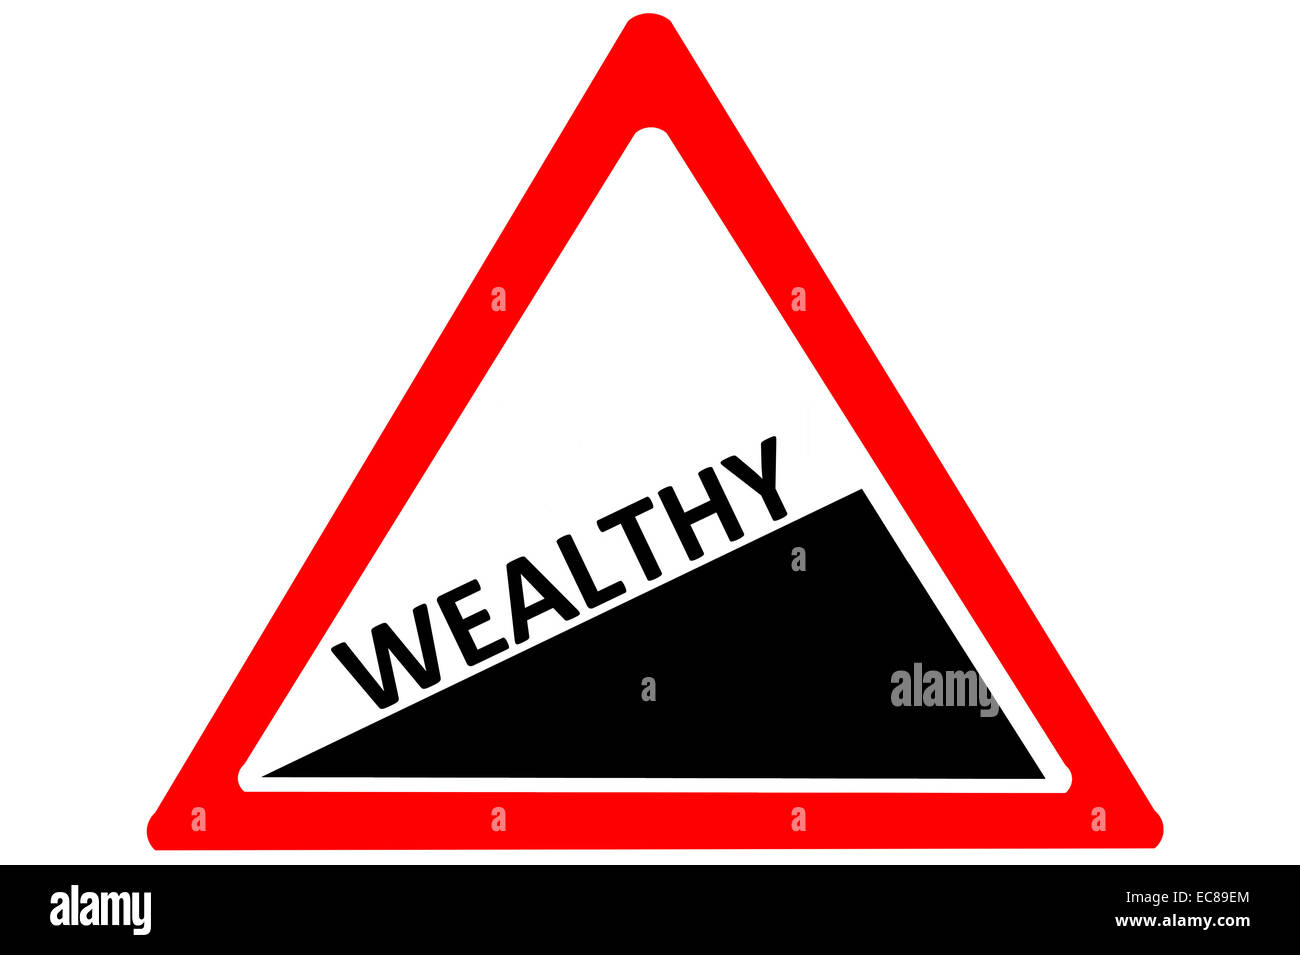 Wealthy increasing warning road sign isolated on pure white background Stock Photo